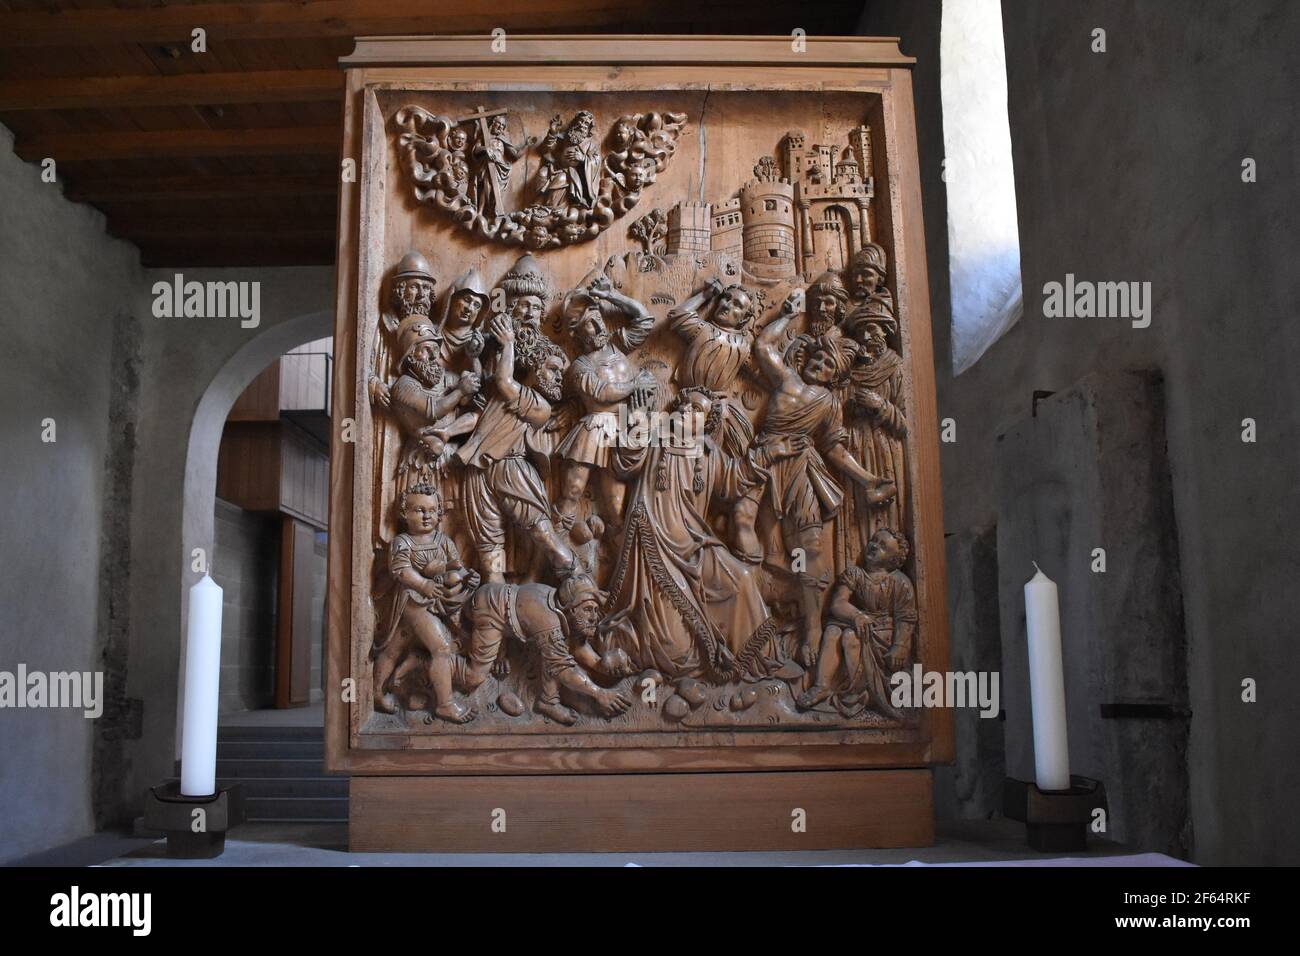 The Abbey Church of St Mary and Mark in Reichenau Mittelzel. Wood relief by Ulrich Gloeckler, 16th century. Martyrdom of Saint Stephen. Stock Photo